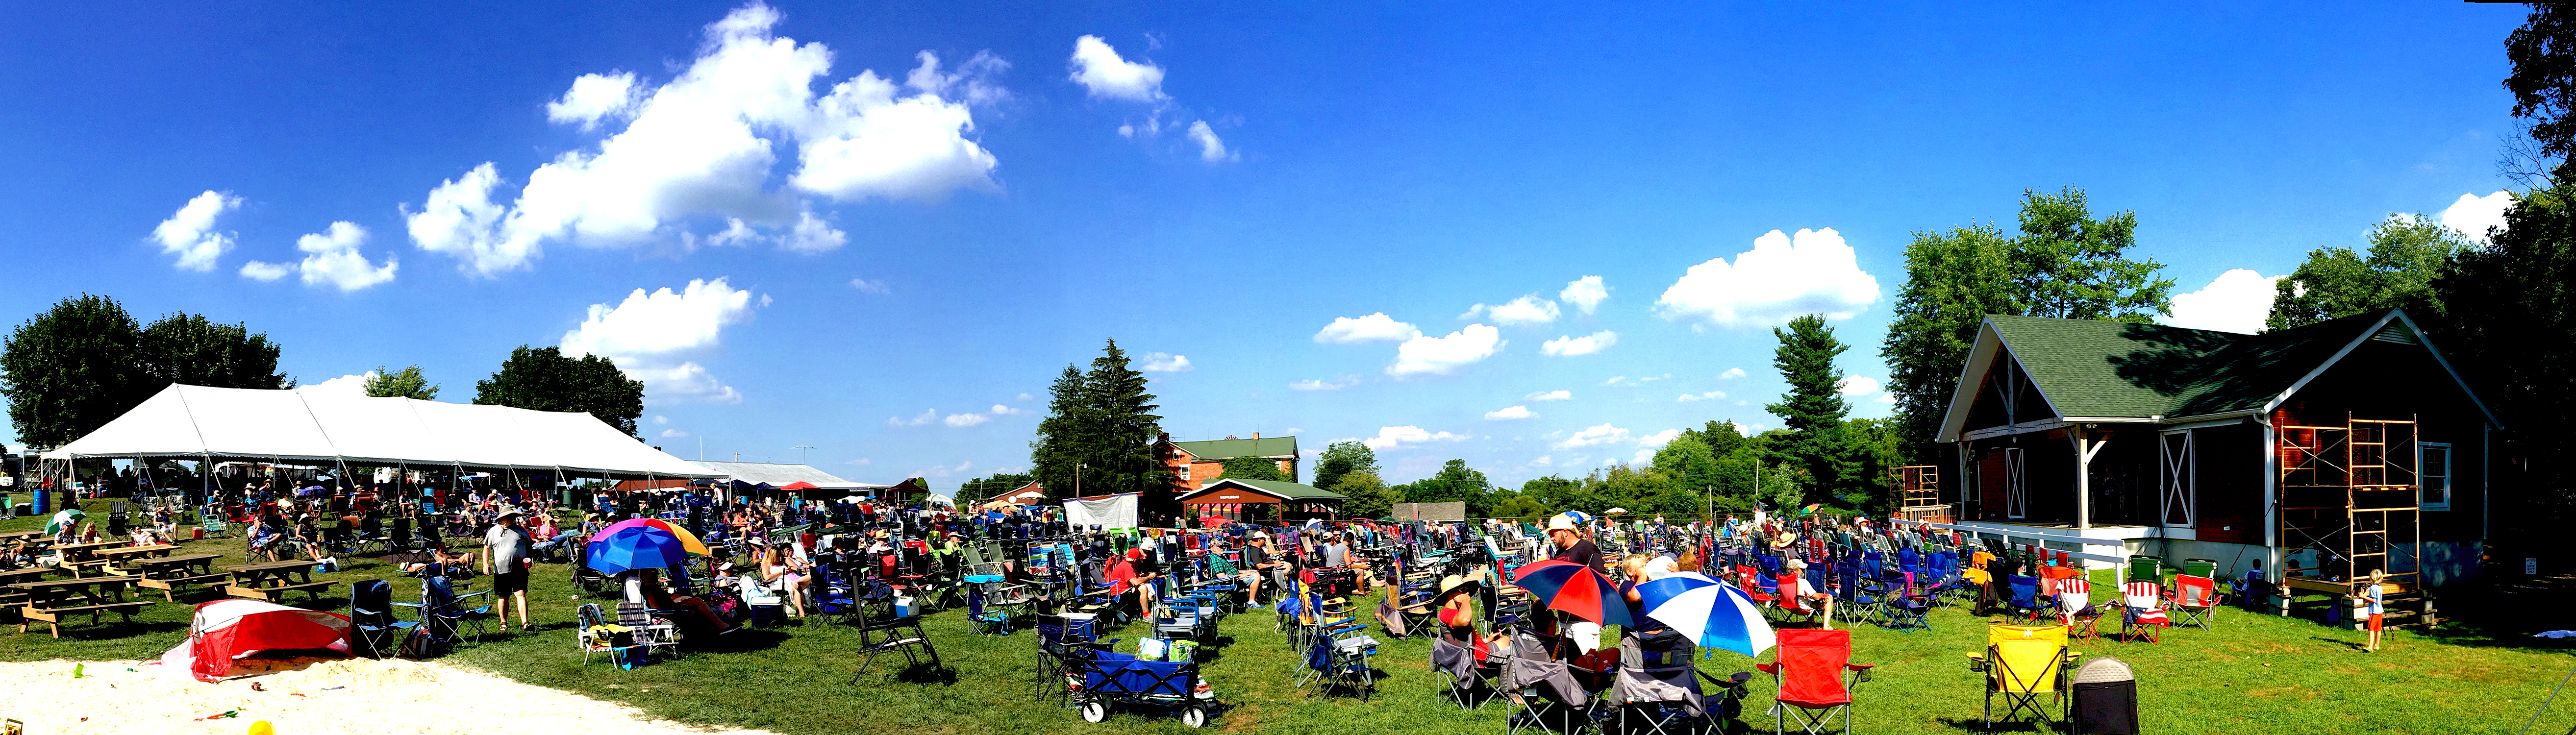 Out of our element and loving it at the Gettysburg Bluegrass Festival